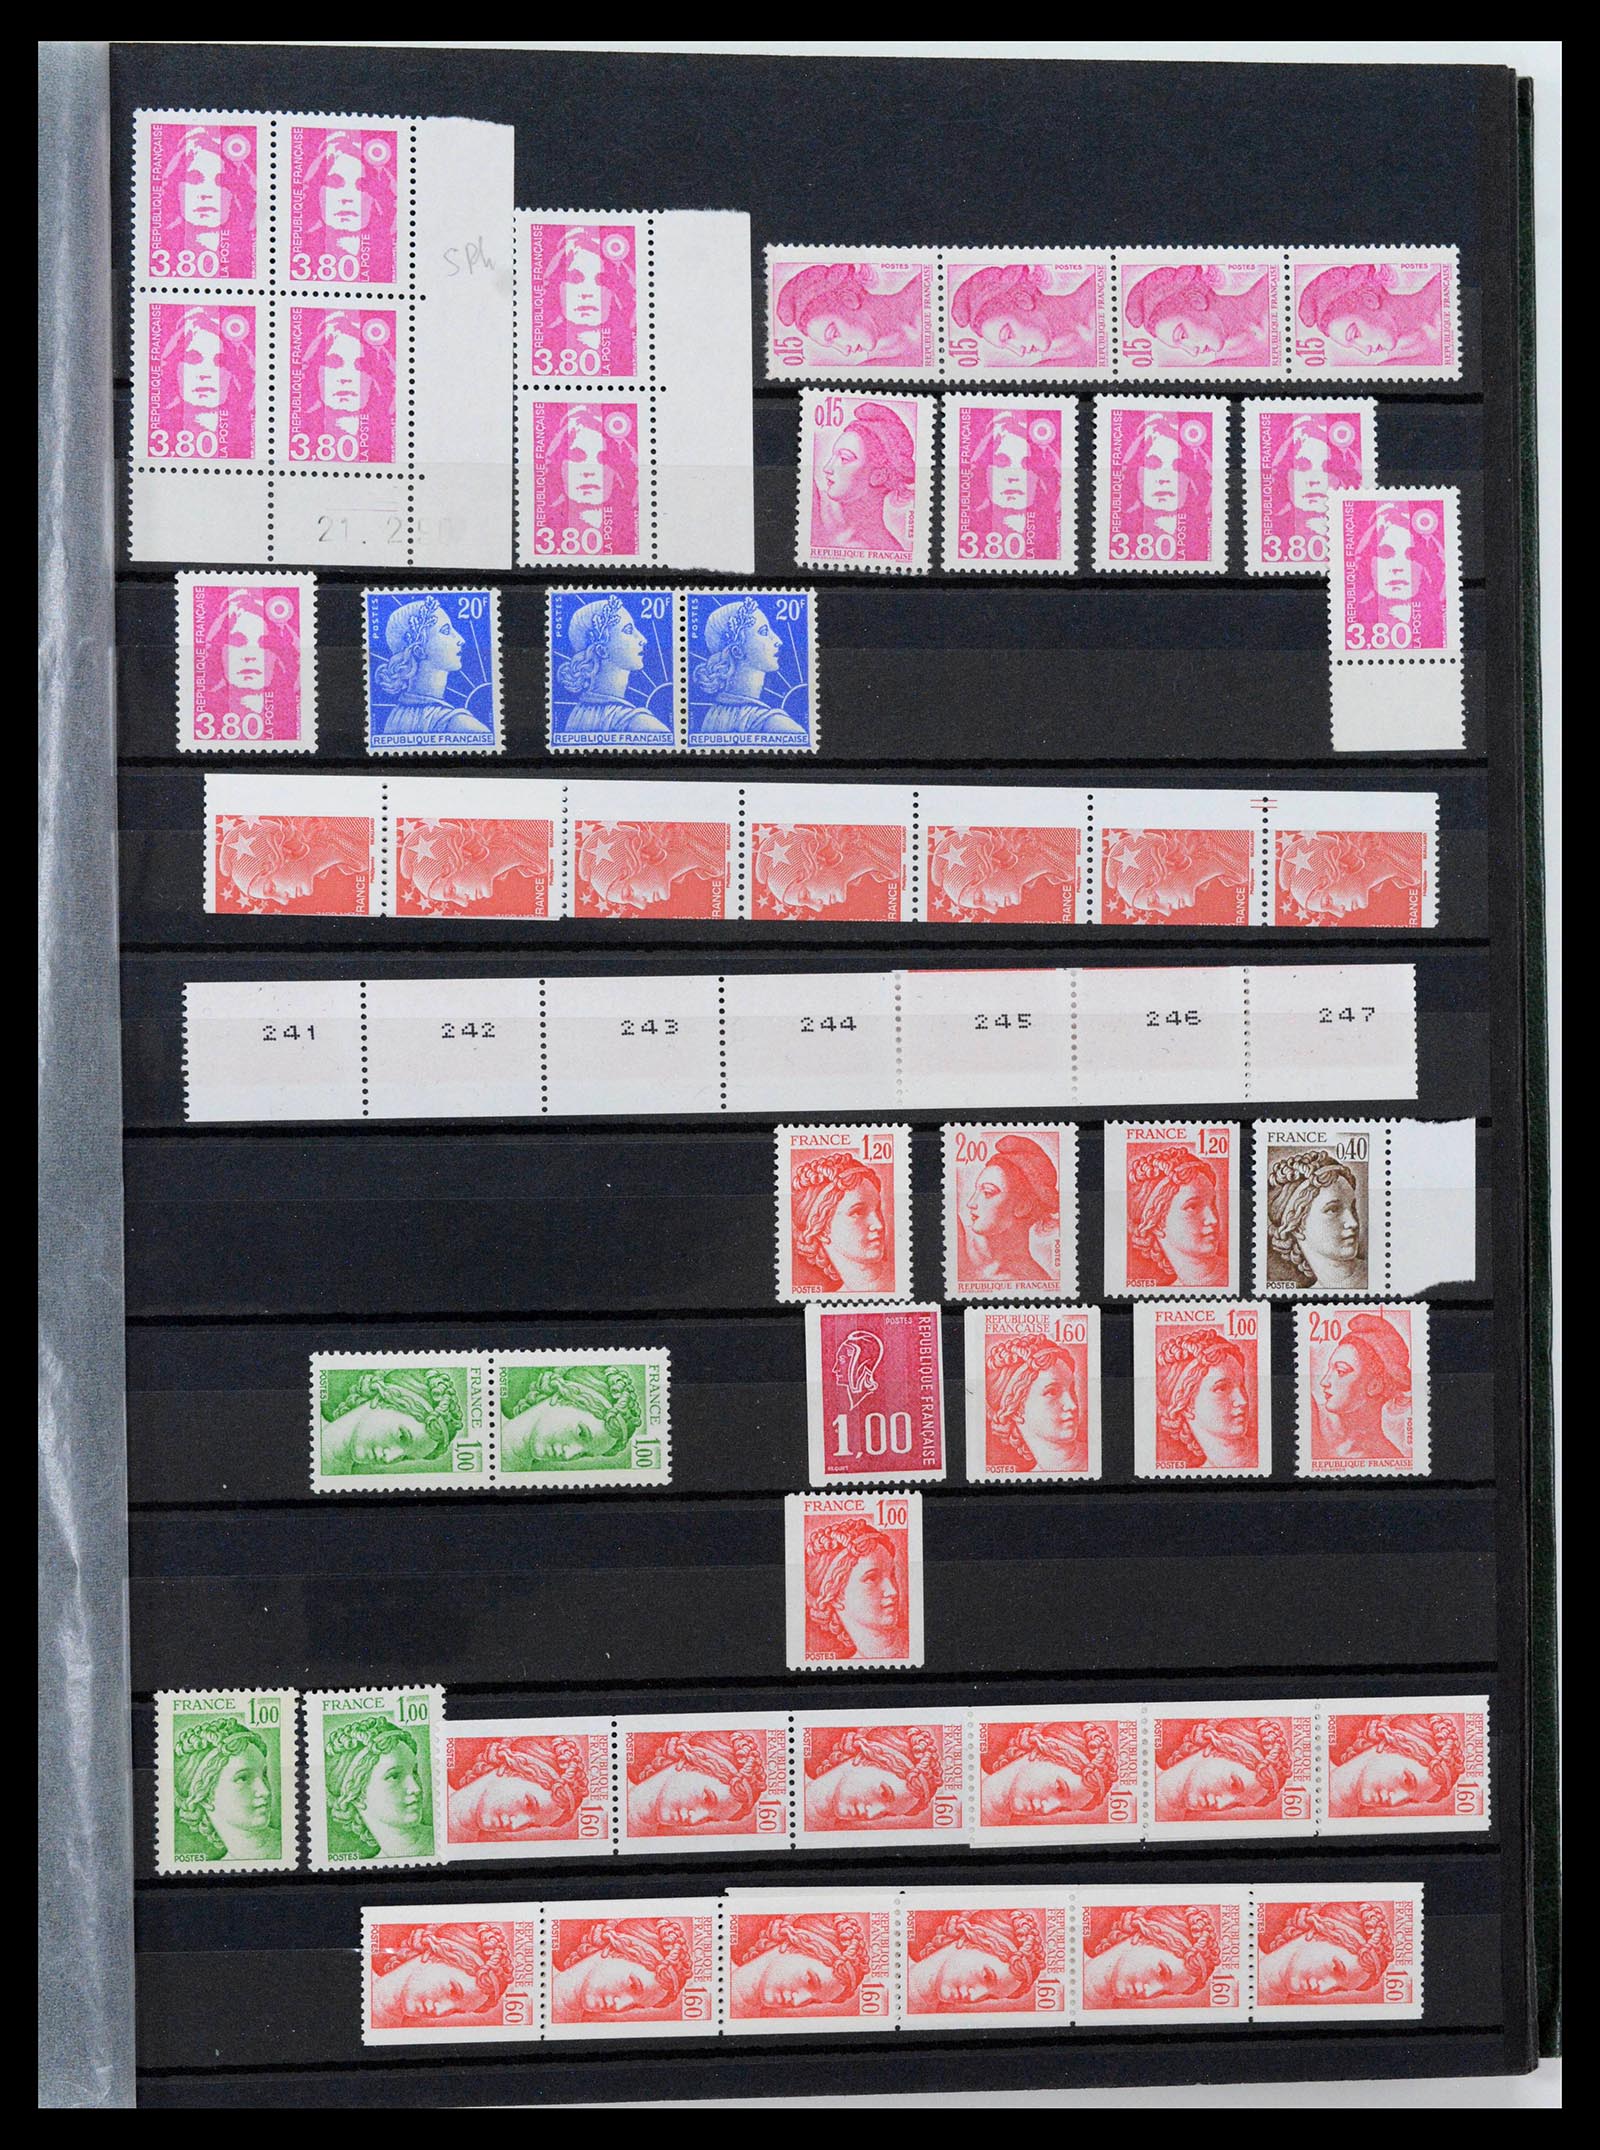 39423 0041 - Stamp collection 39423 France varieties 1862-1985.